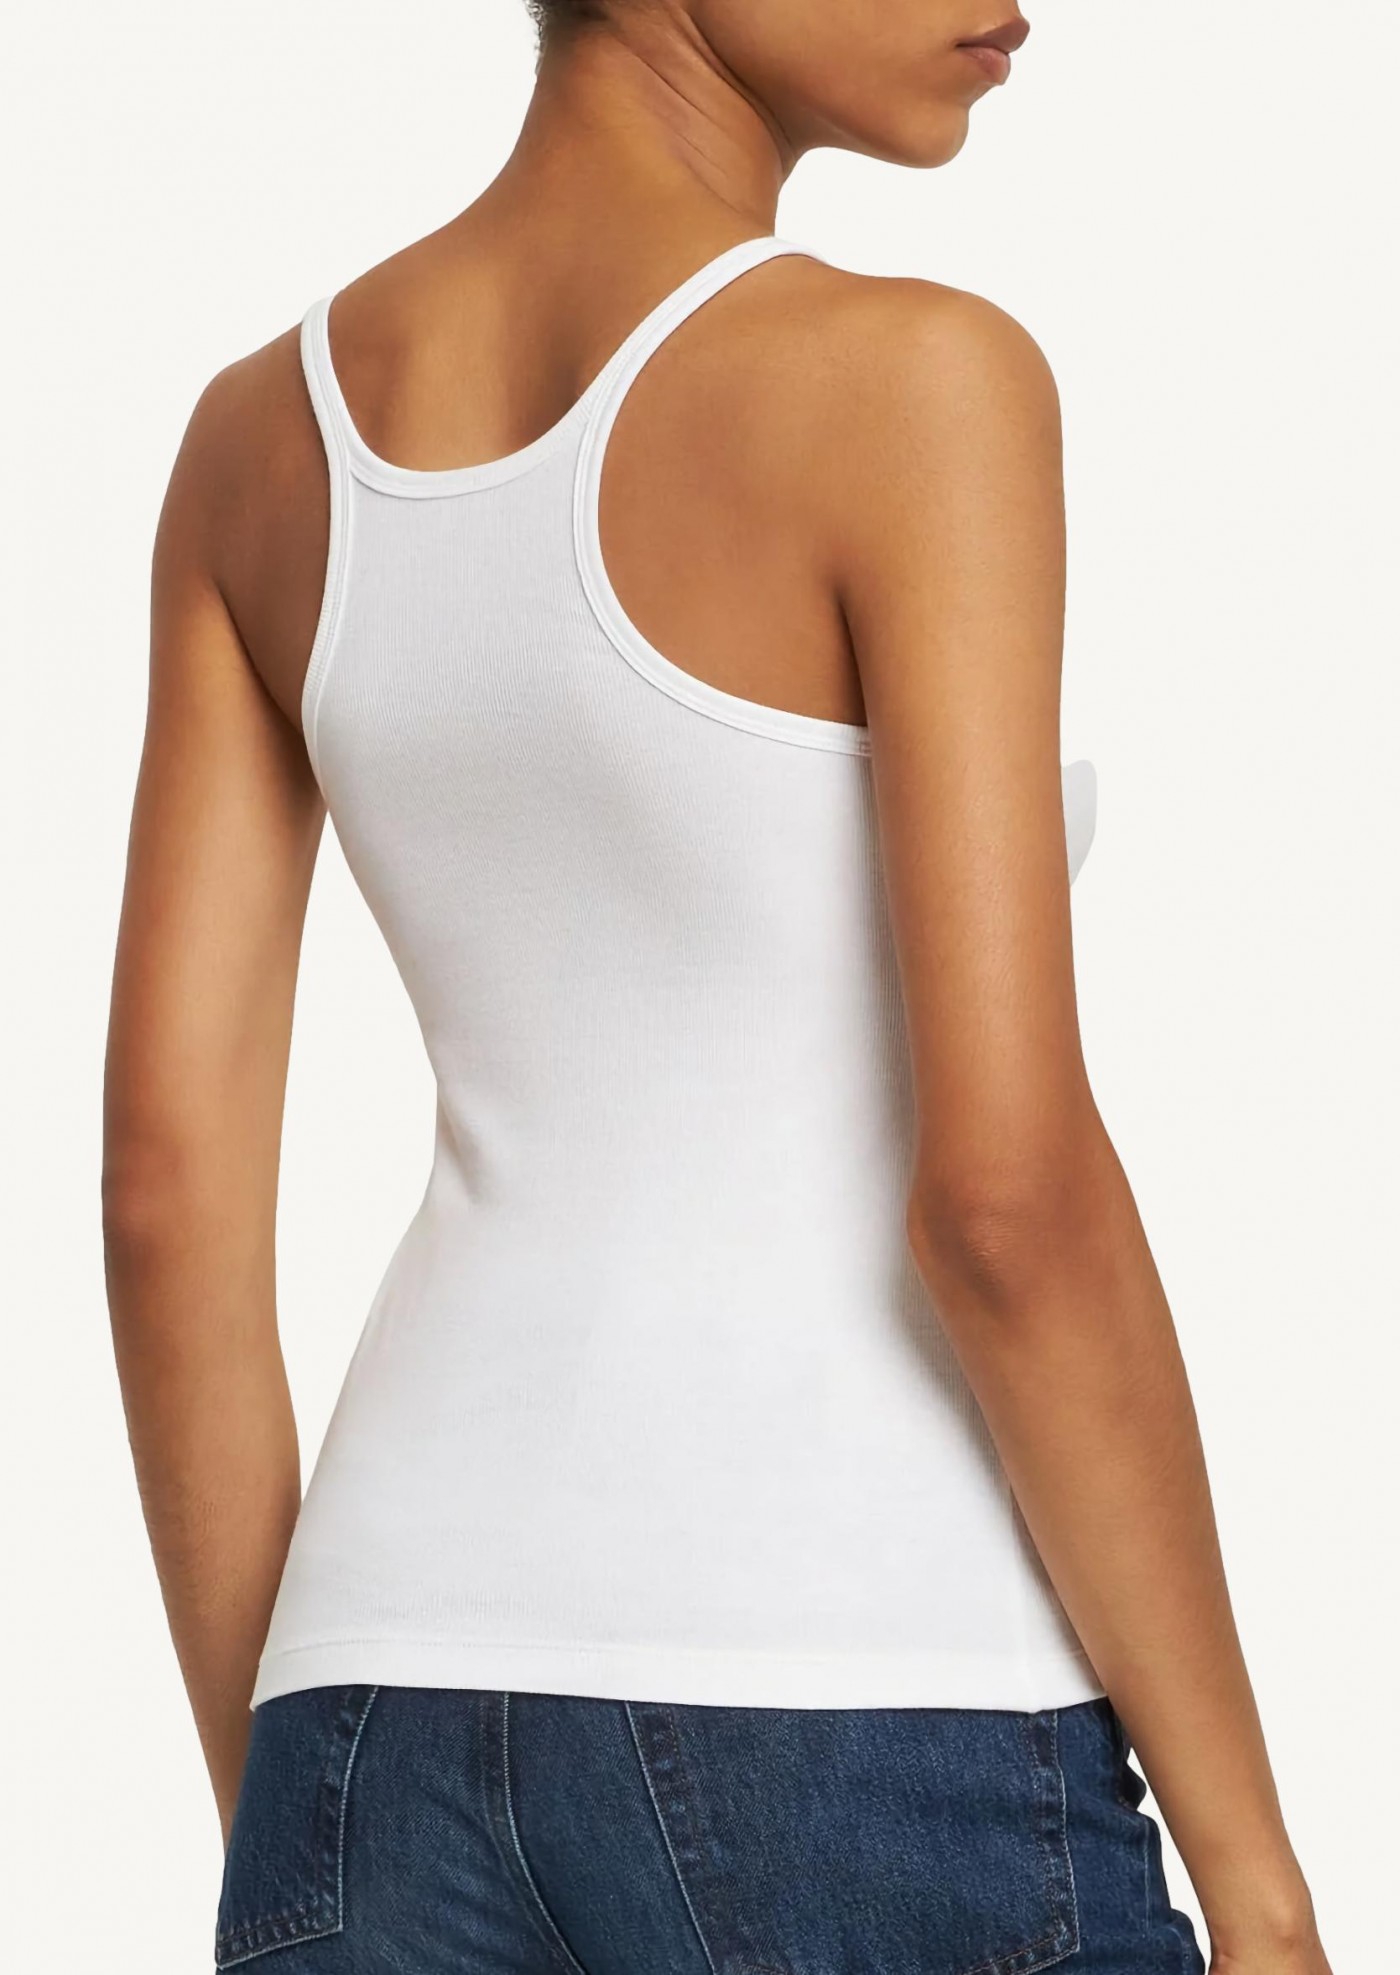 Ribbed tank top with white scoop neck